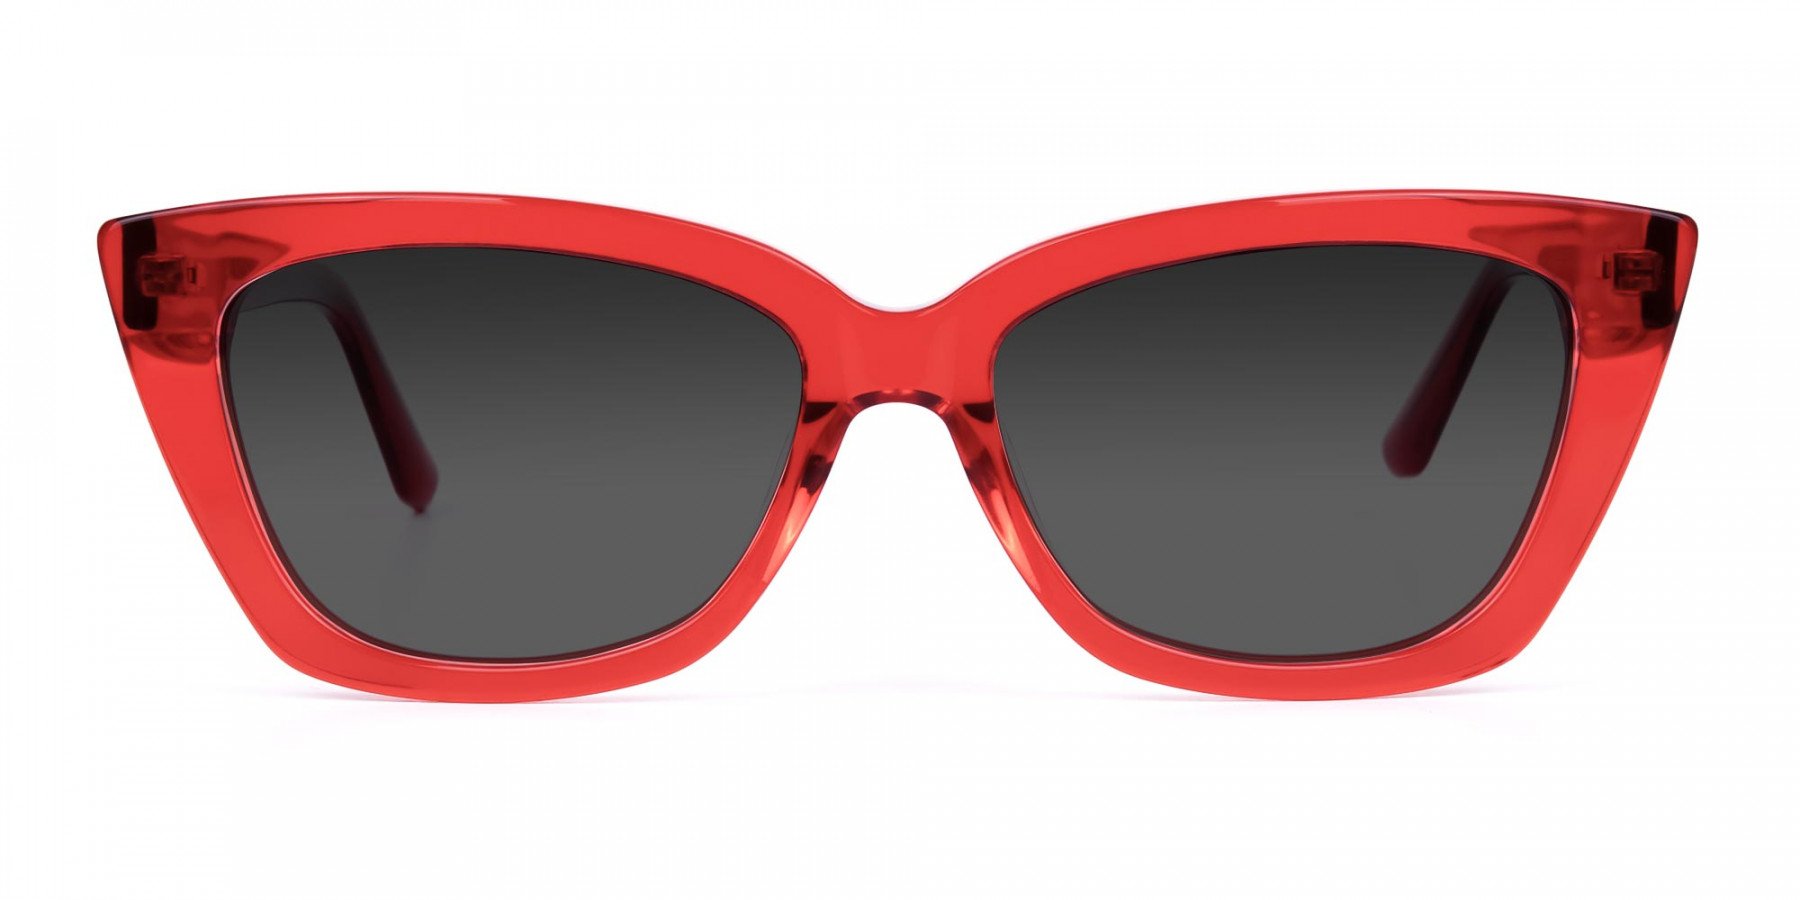 Cherry Red Big Cat Eye Sunglasses With Grey Tint Specscart ®